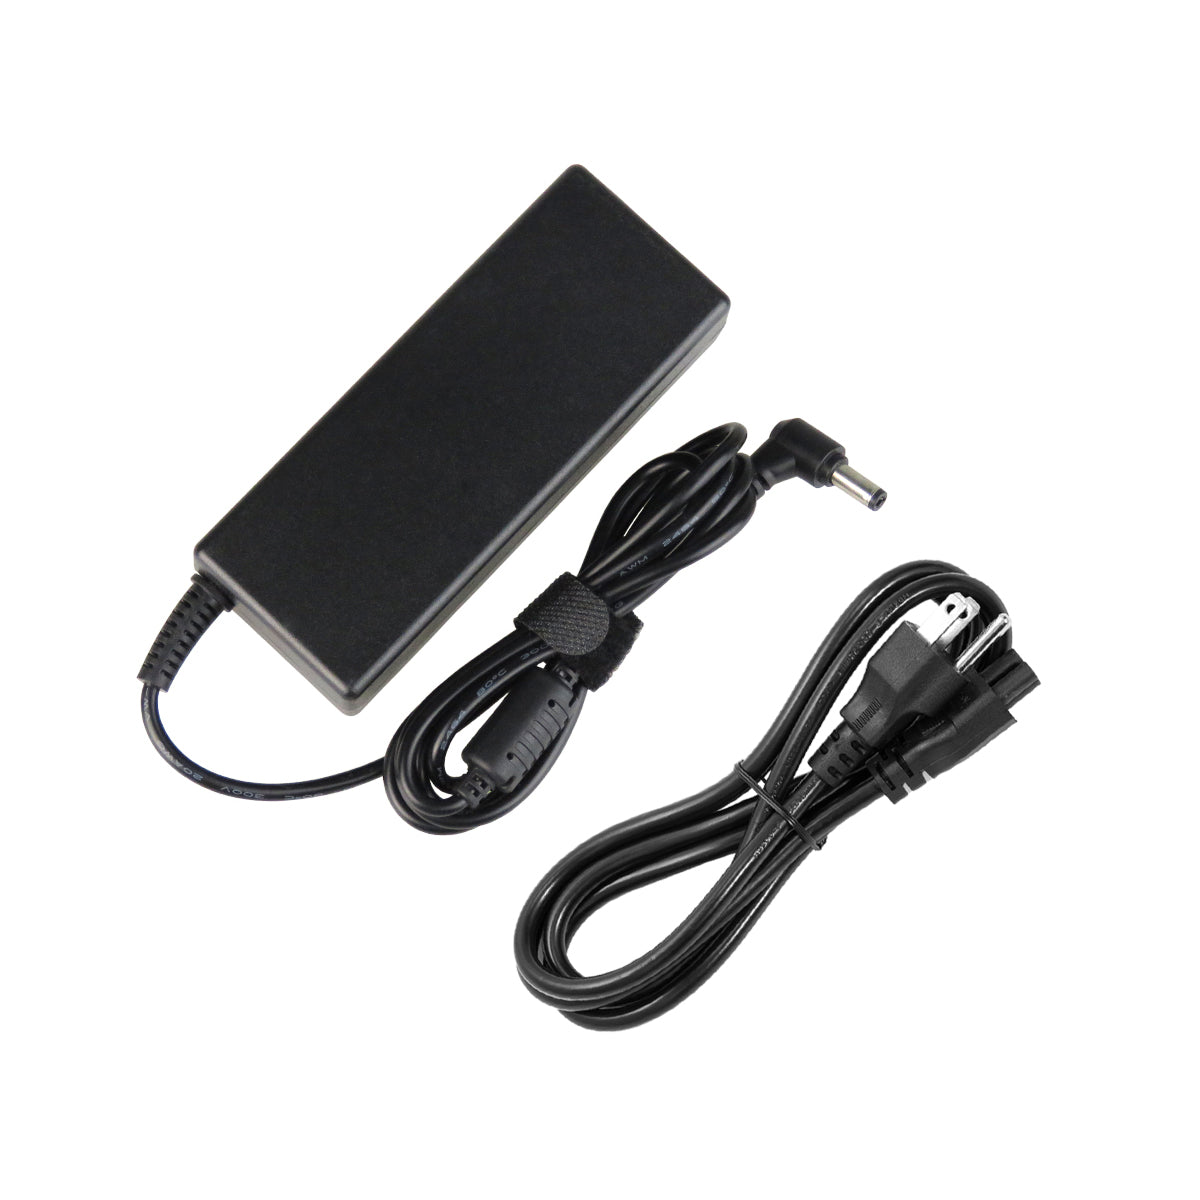 AC Adapter Charger for ASUS P53 Notebook.